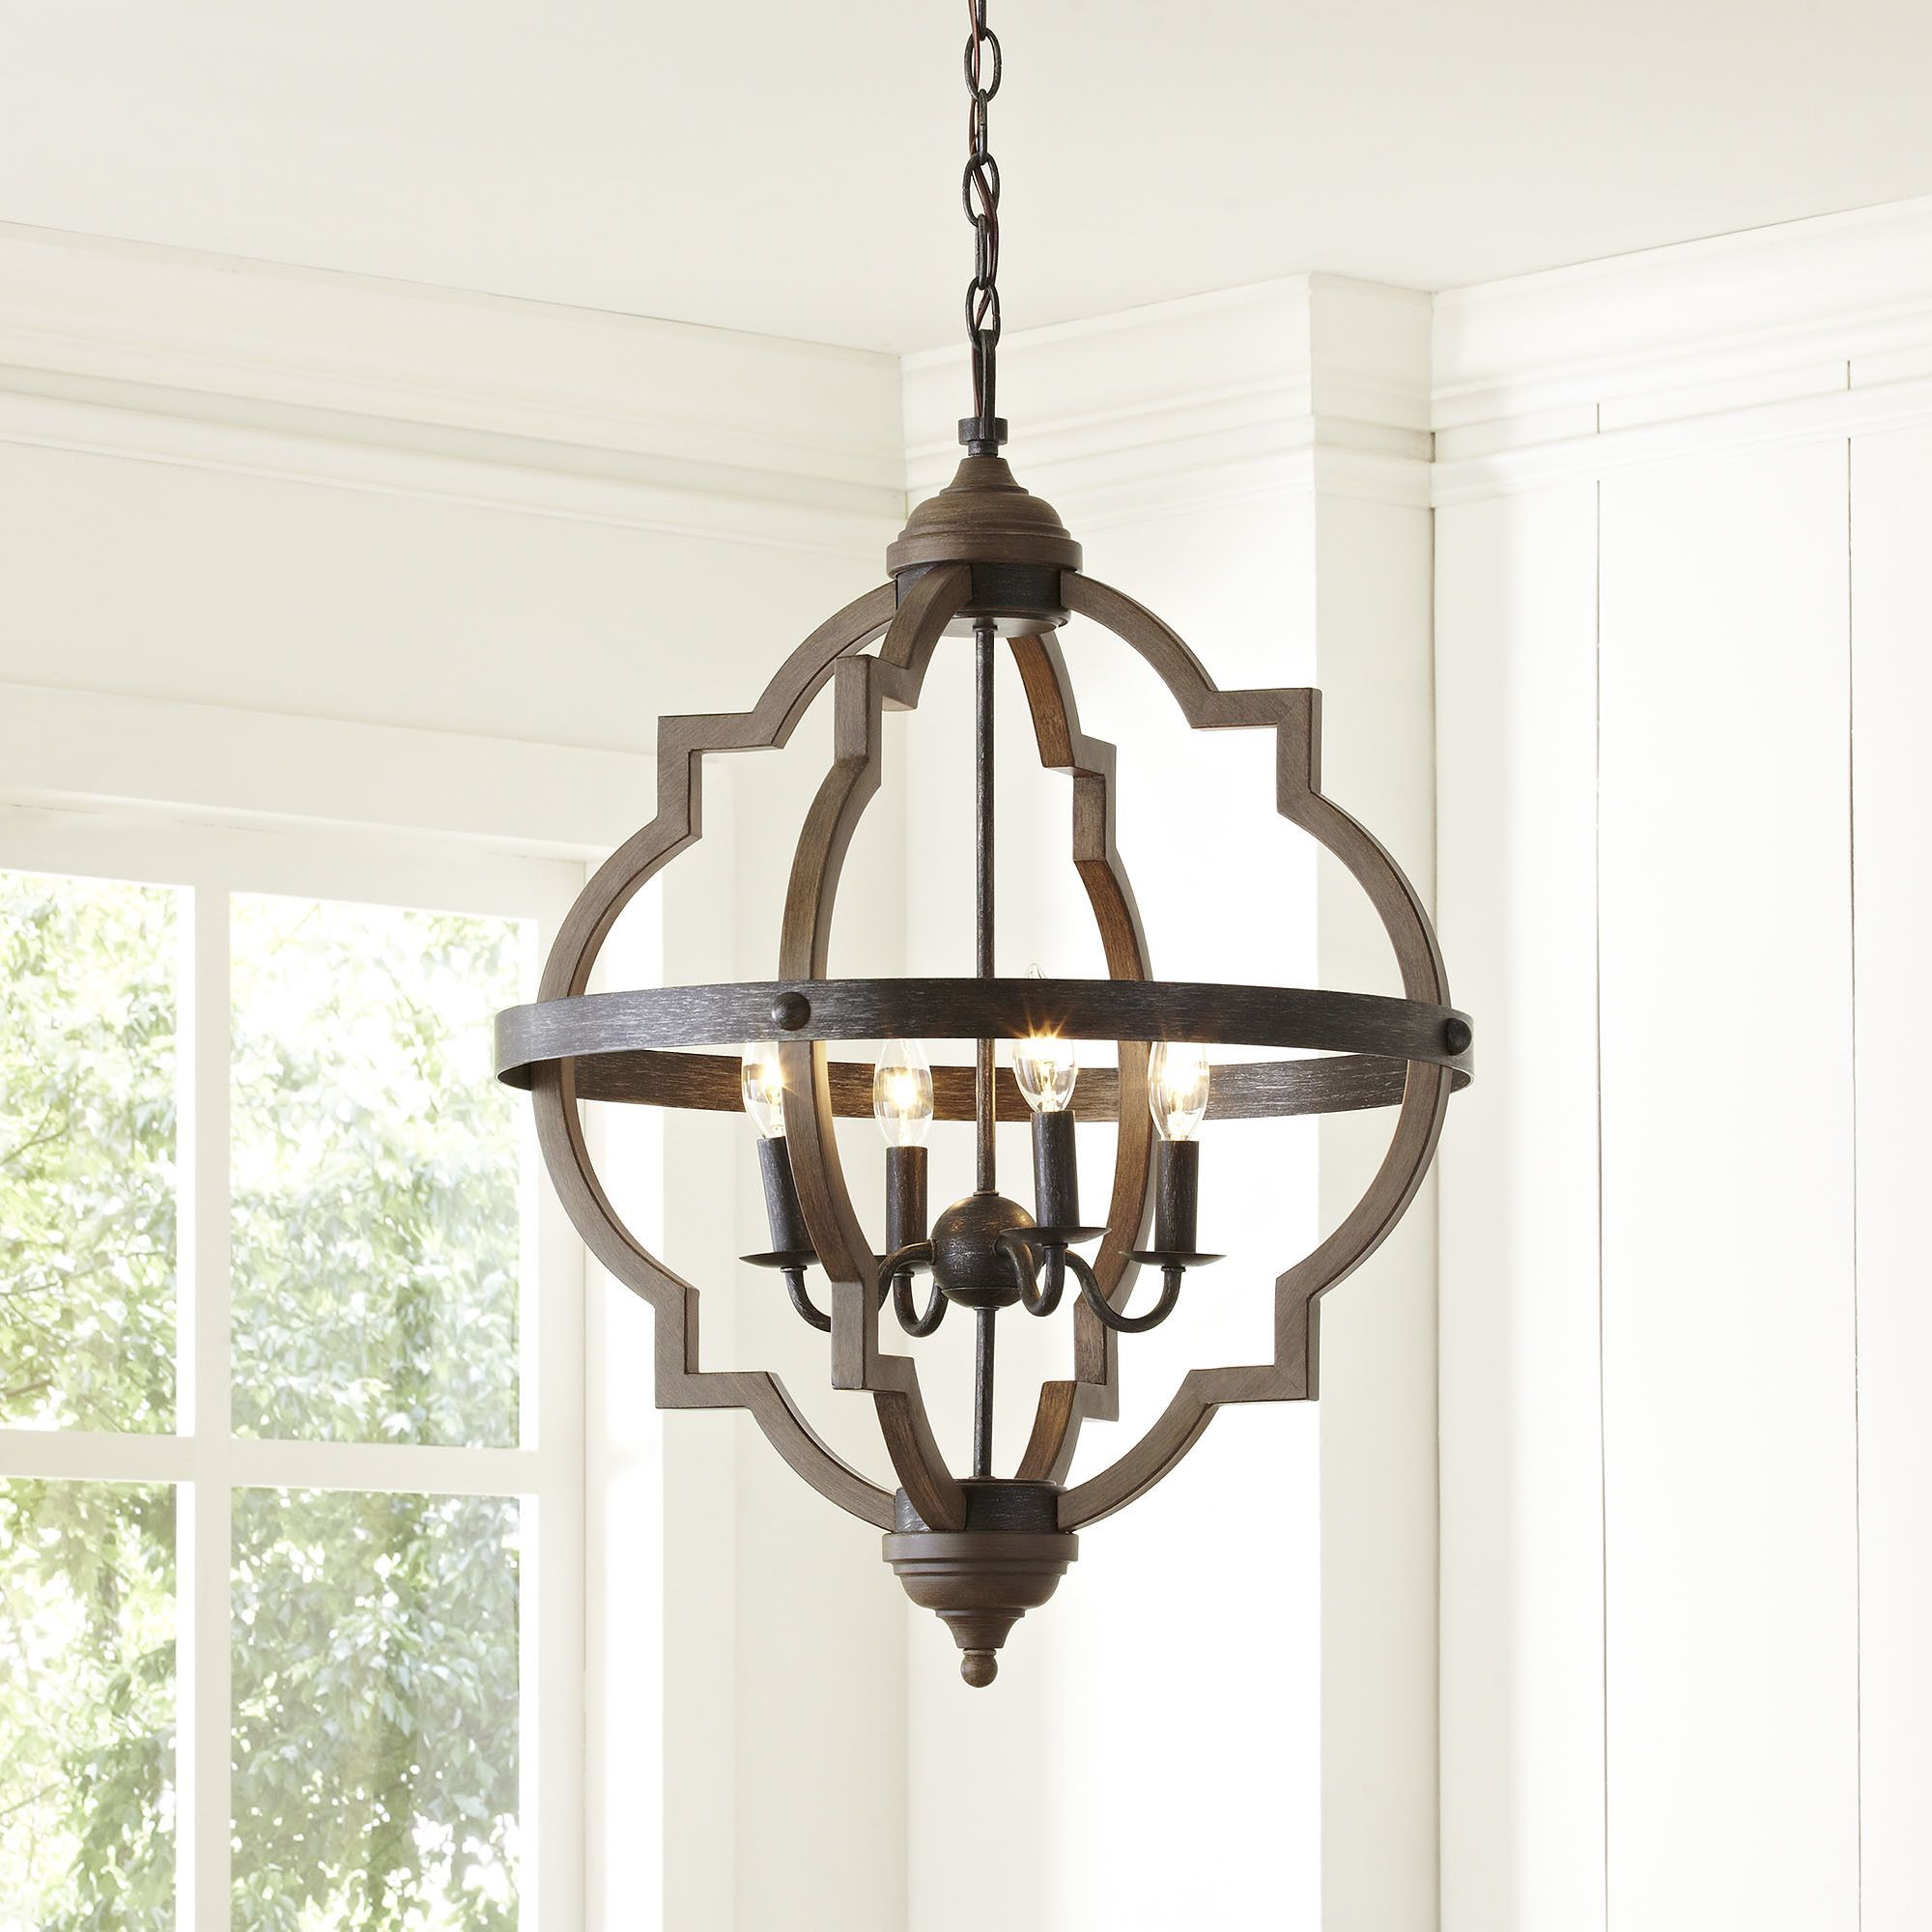 Laurel Foundry Modern Farmhouse Donna 4 Light Hall Pendant With Donna 4 Light Globe Chandeliers (View 18 of 30)